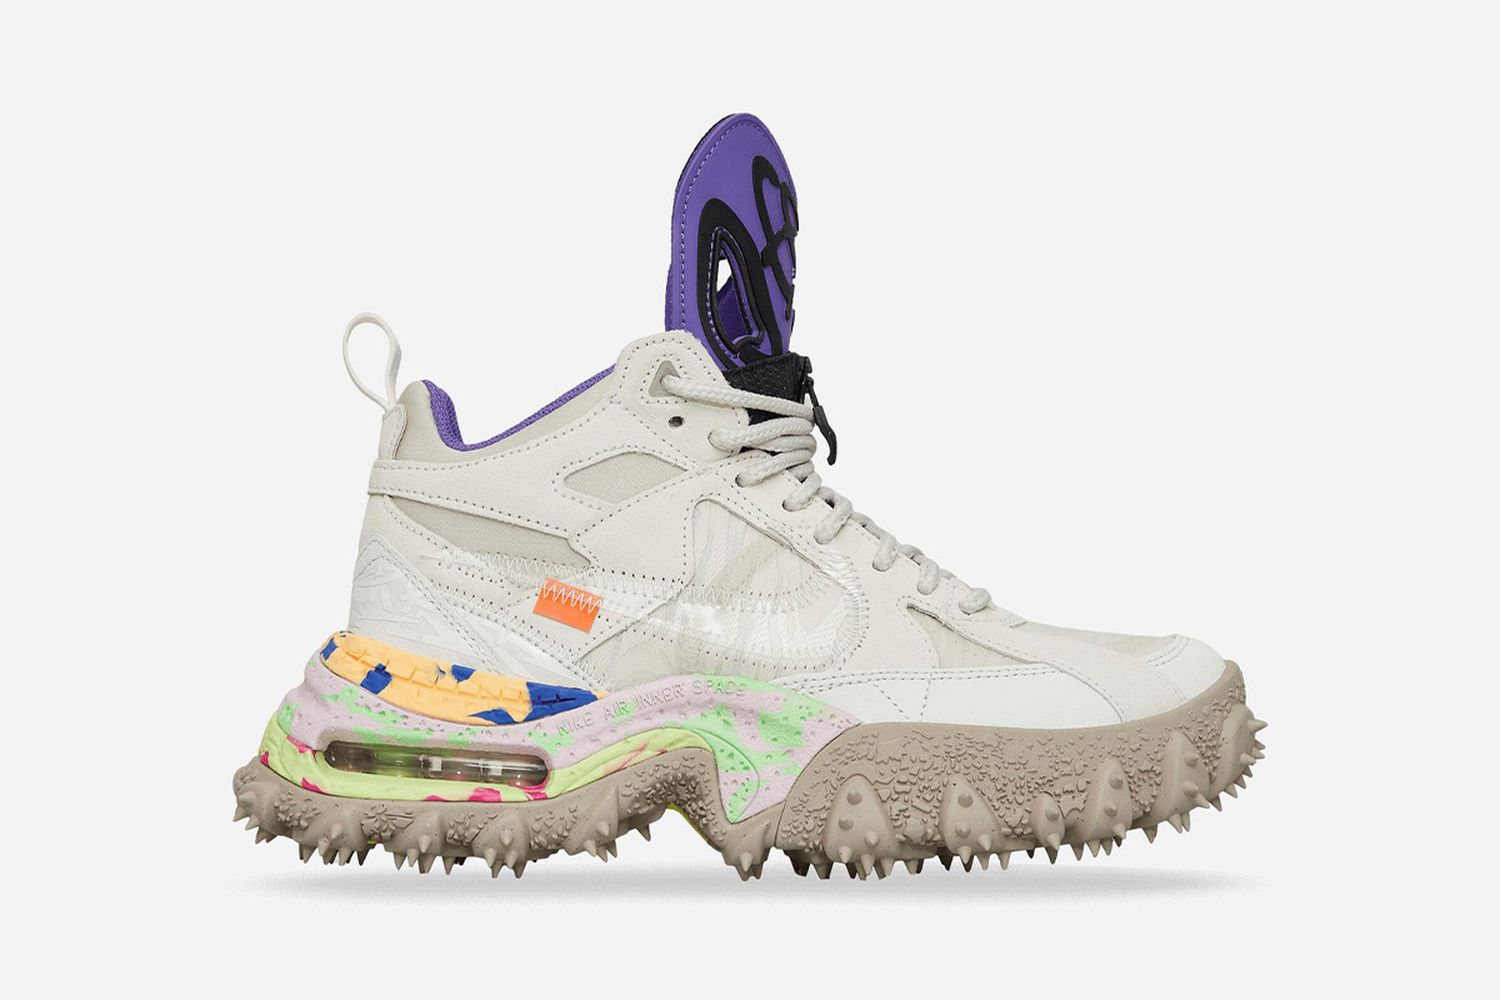 Shop the Latest Nike x Off-White™ Collection Here